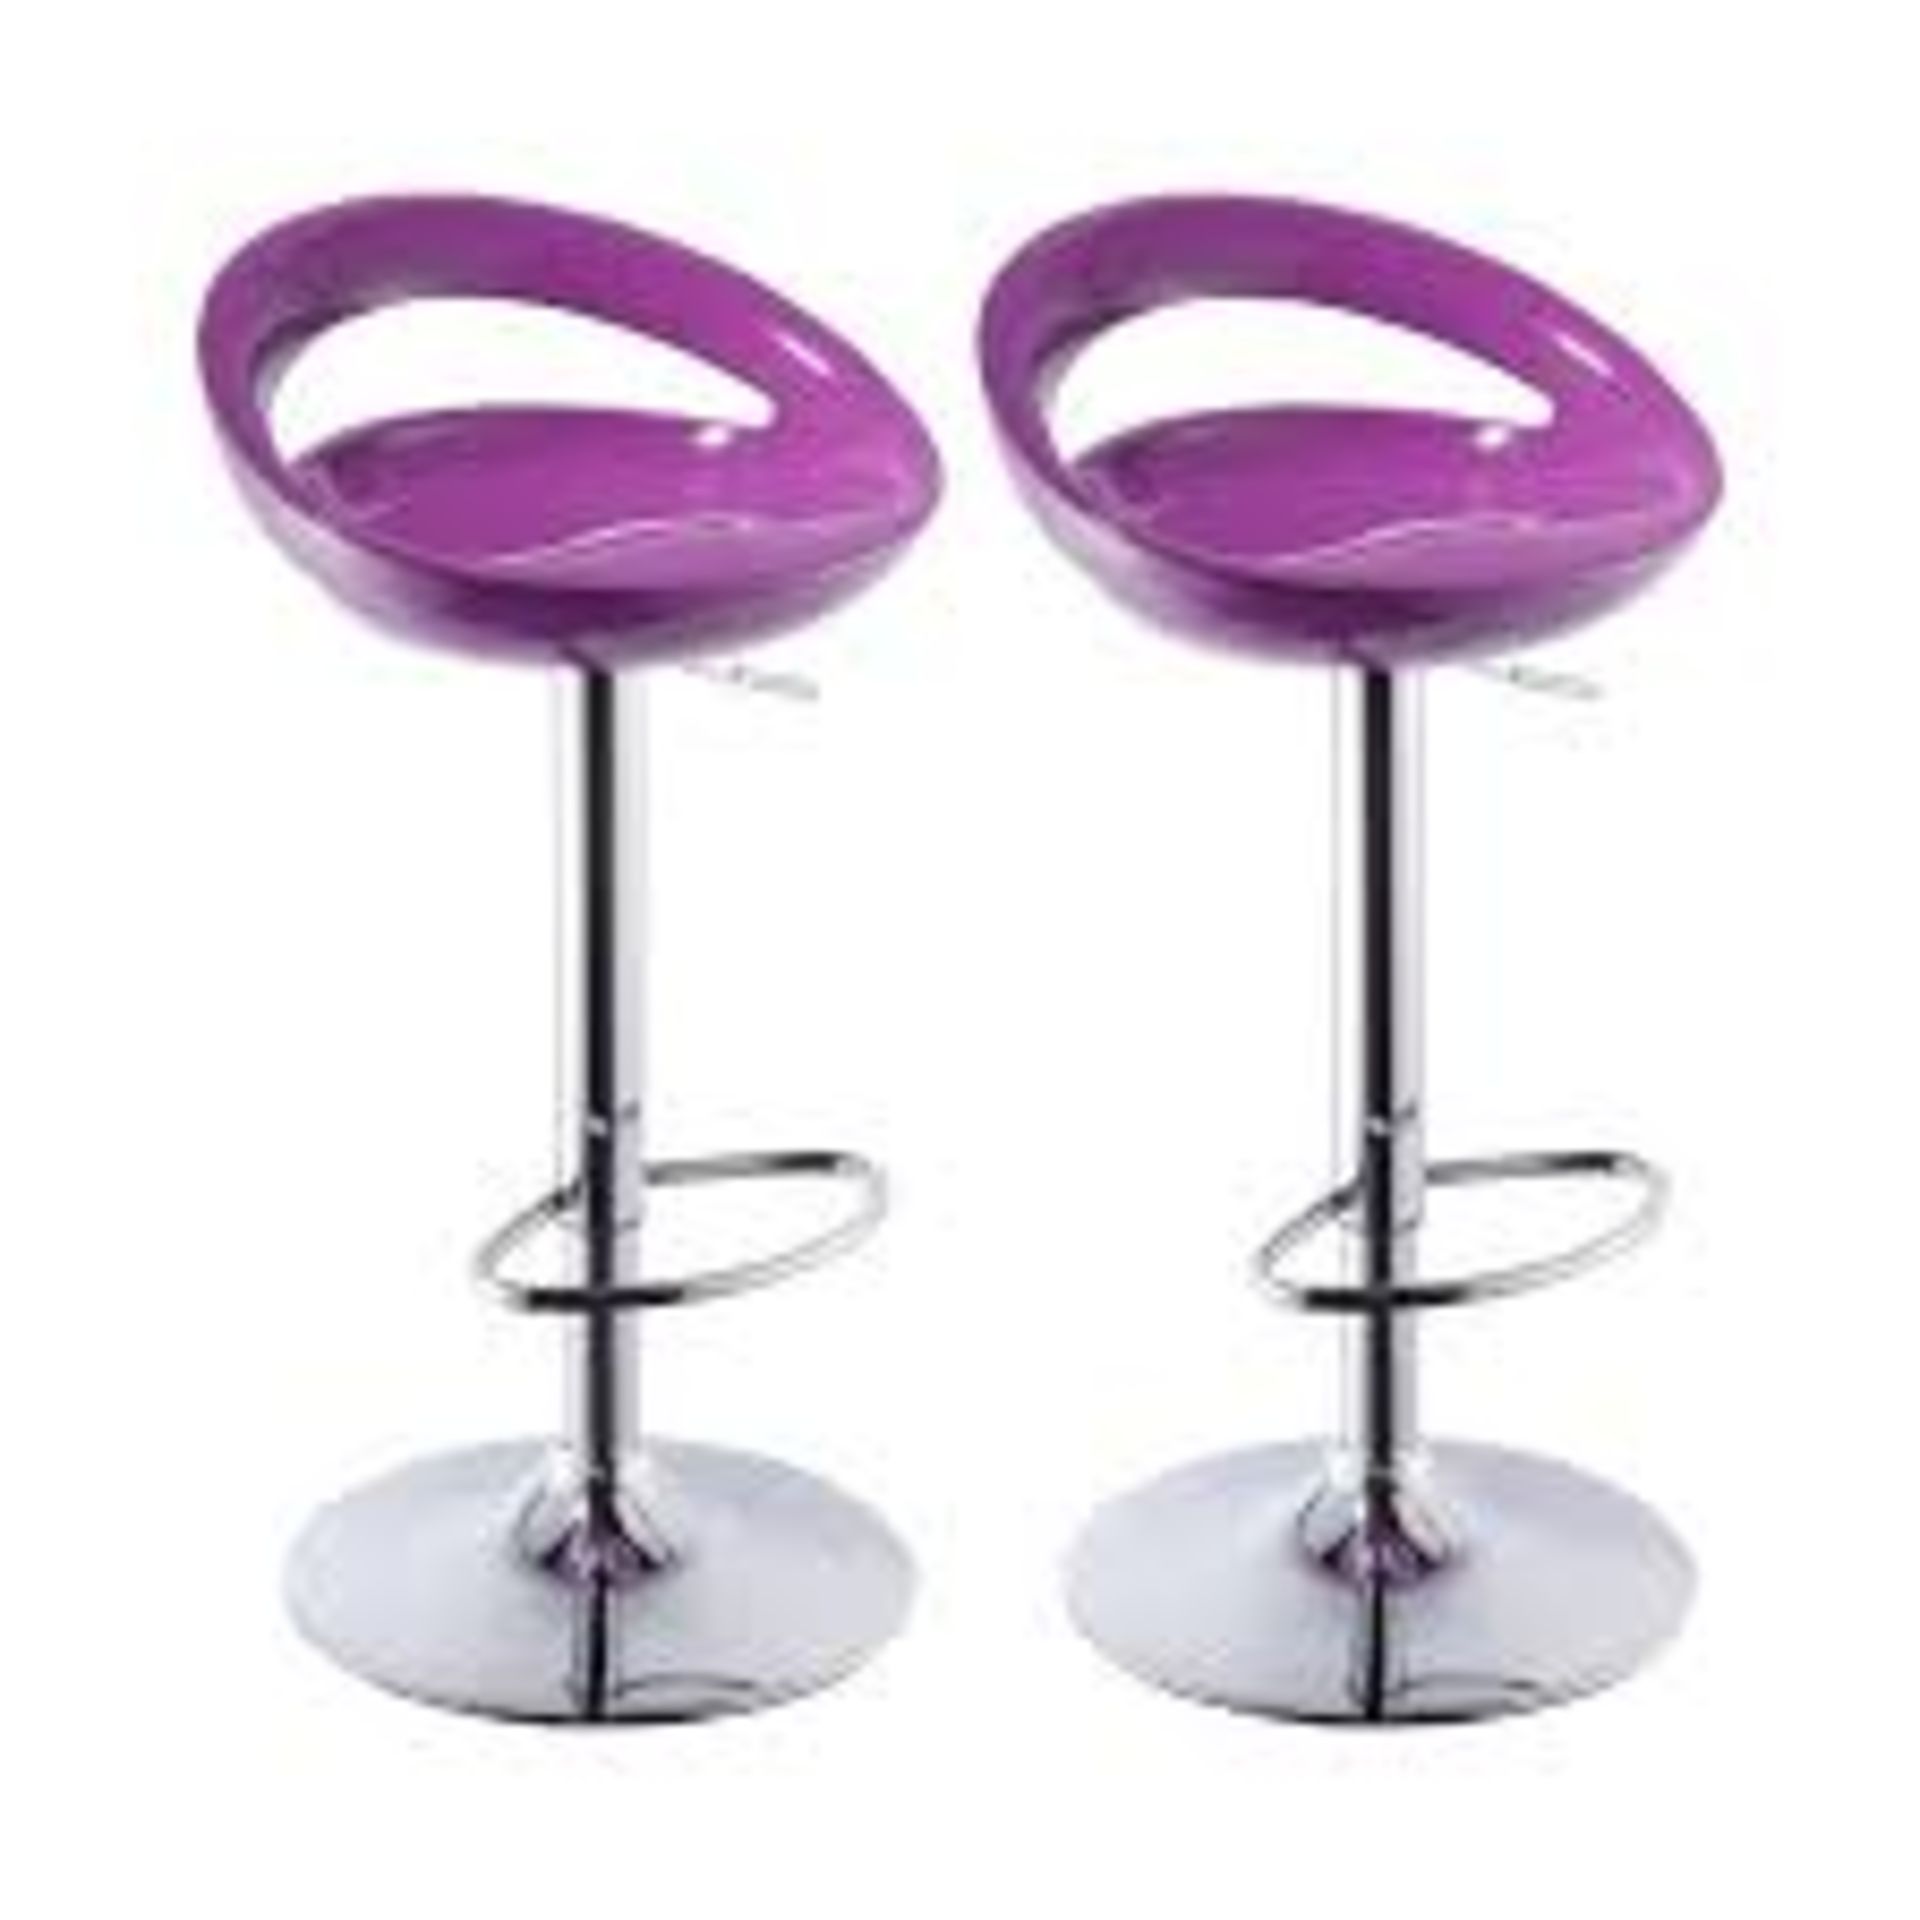 Boxed Set Of 2 Demont Cream Leather & Chrome Bar Stool RRP £80 Combined